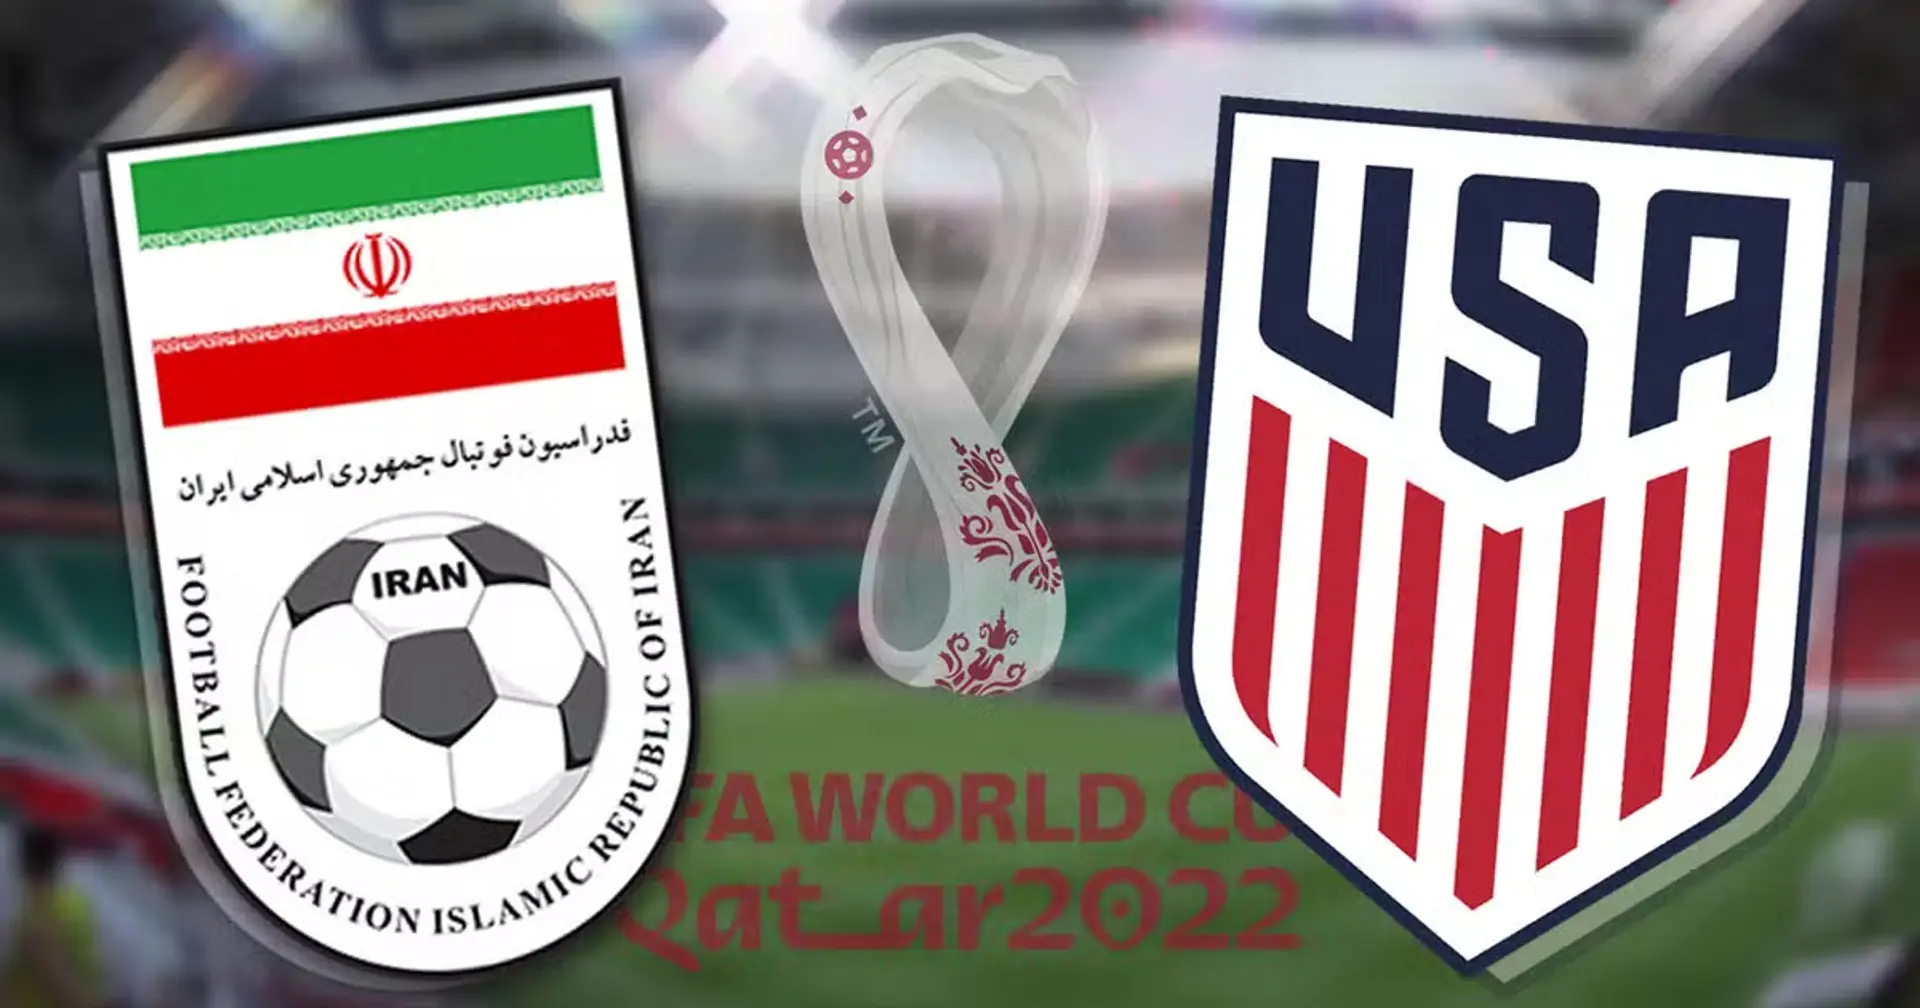 Iran vs USA: Official team lineups for the World Cup clash revealed